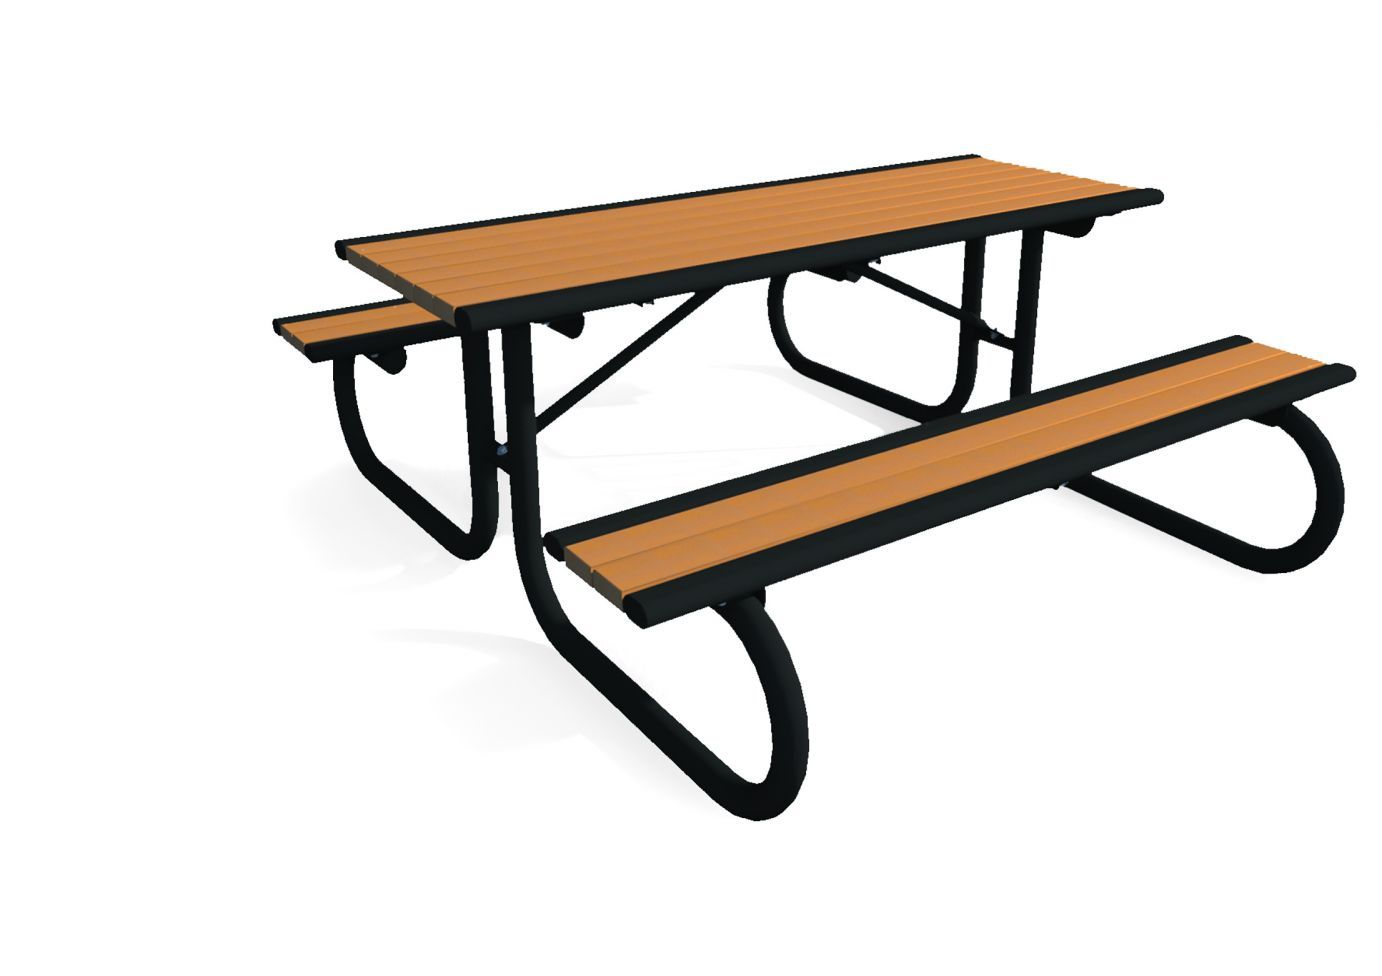 Richmond Recycled Multi-Pedestal Table | WillyGoat Playground & Park Equipment